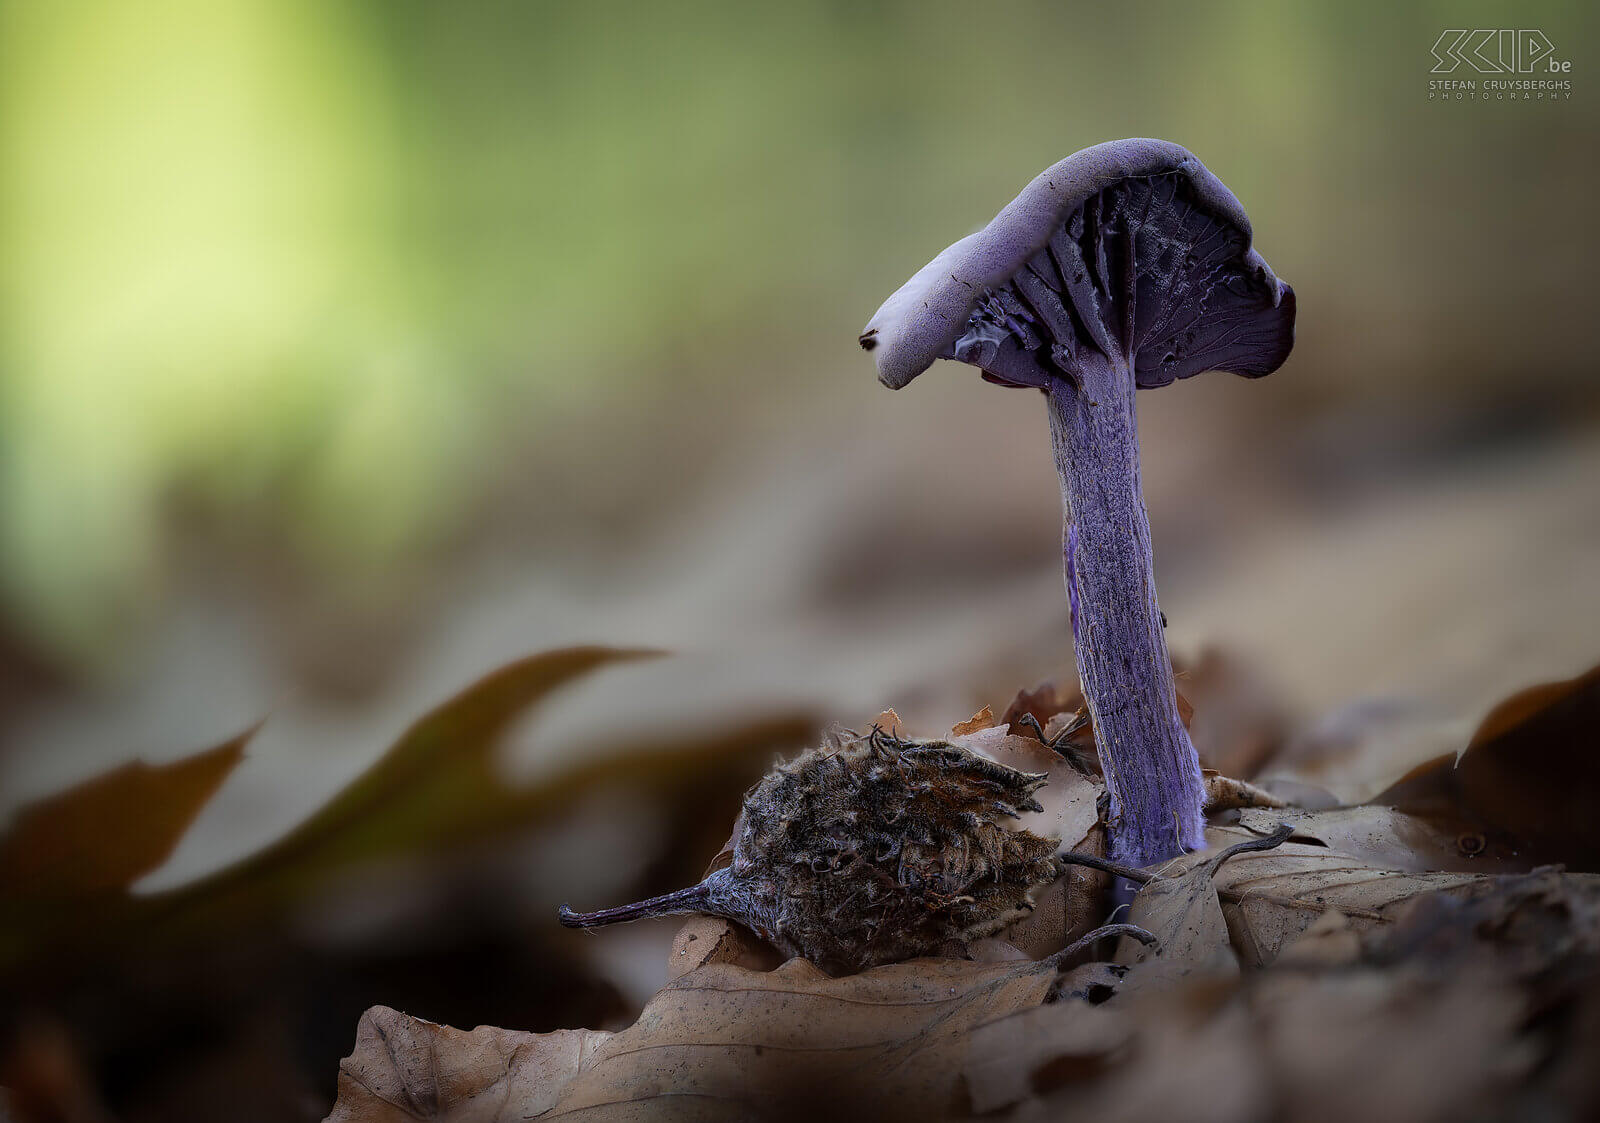 Mushrooms - Amethyst deceiver This autumn many beautiful mushrooms and fungi appear again in our forests and gardens Stefan Cruysberghs